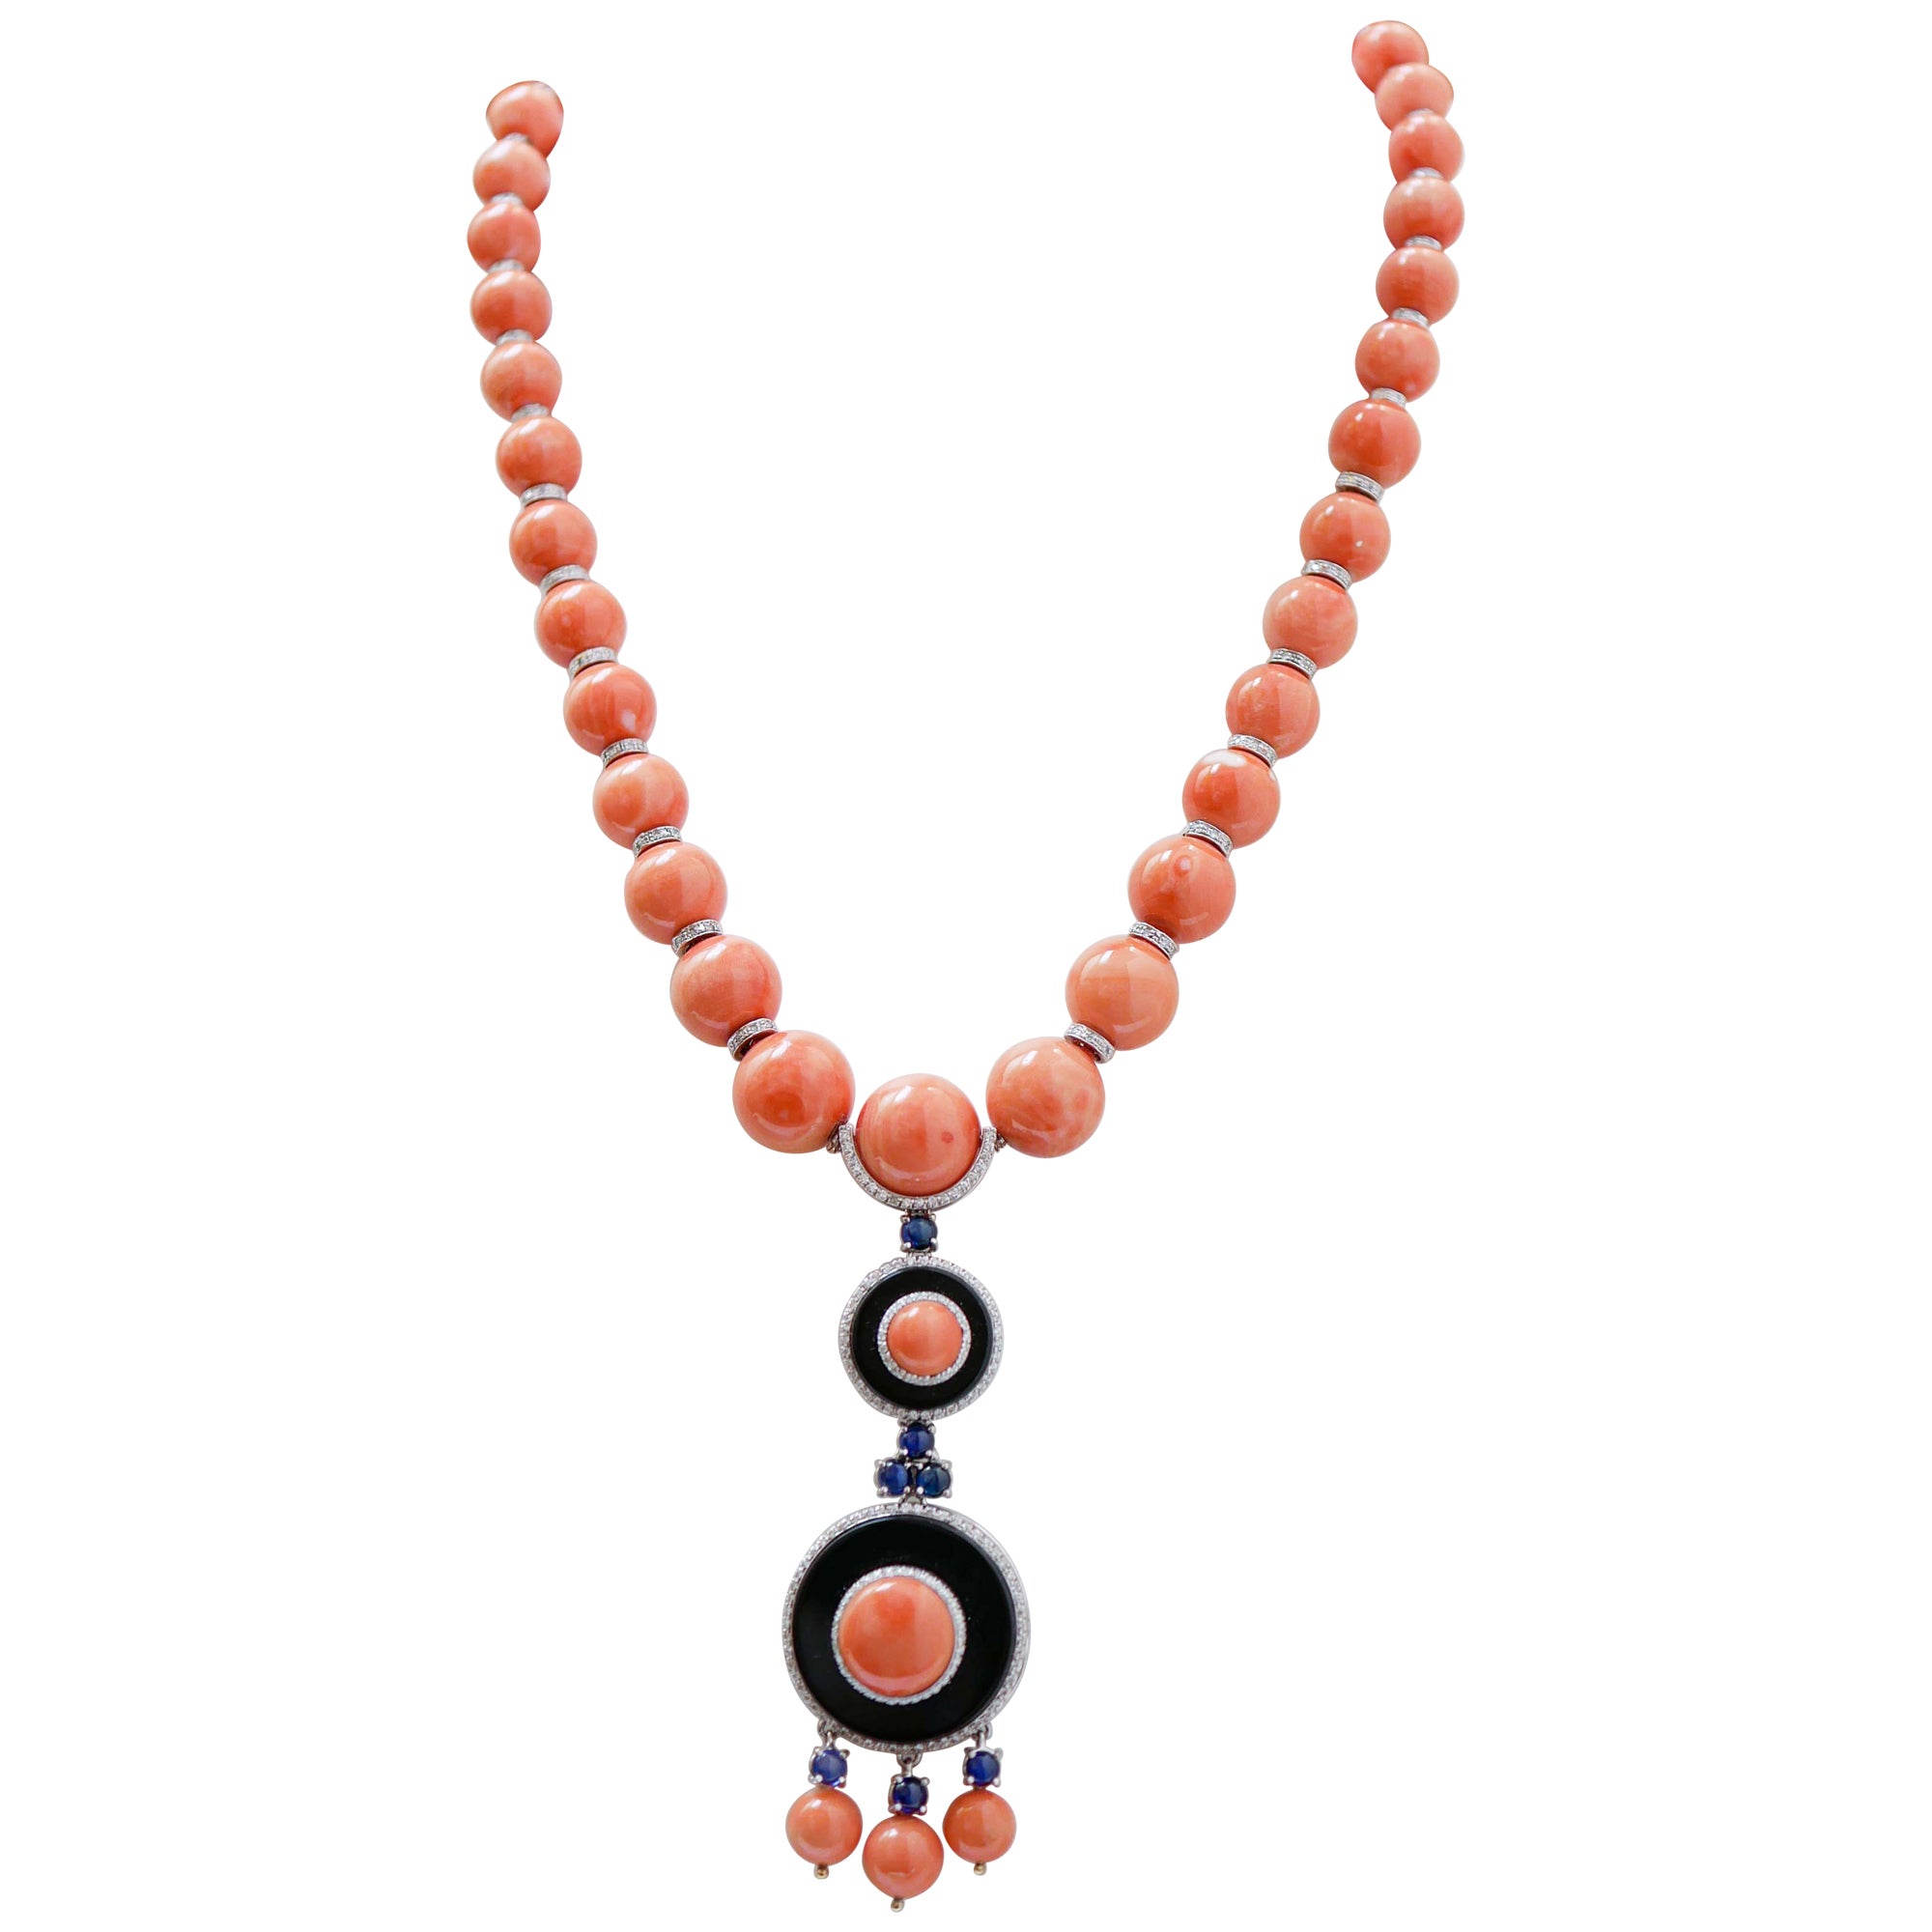 Coral, Onyx, Sapphires, Diamonds, 18 Kt White Gold and 14 kt White Gold Necklace